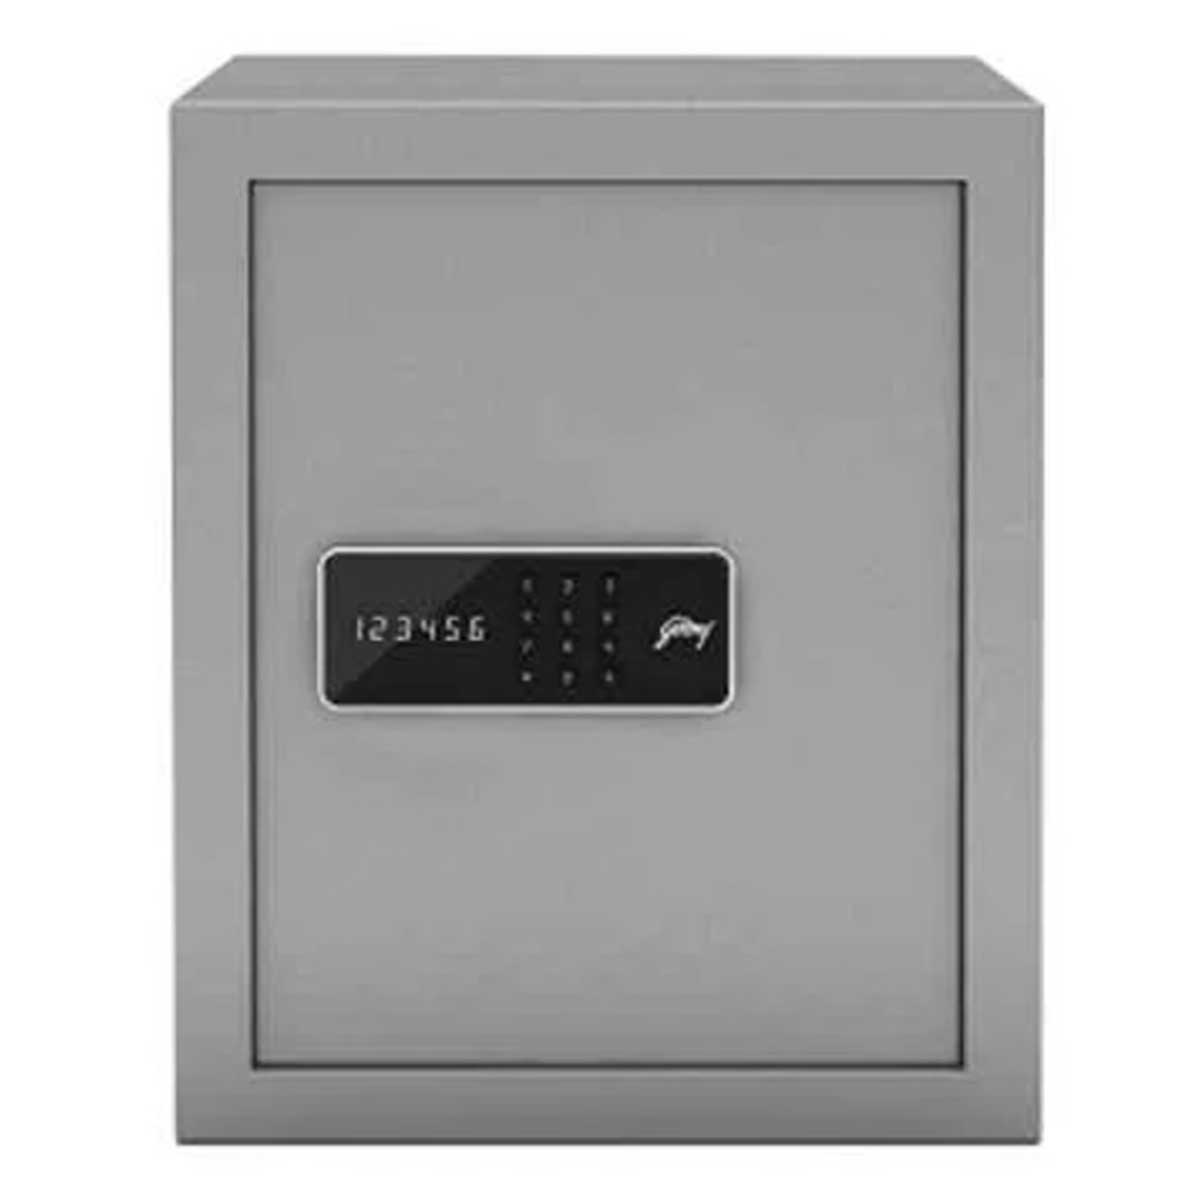 Steel security safe Manufacturers, Suppliers in Rohini Sector 3